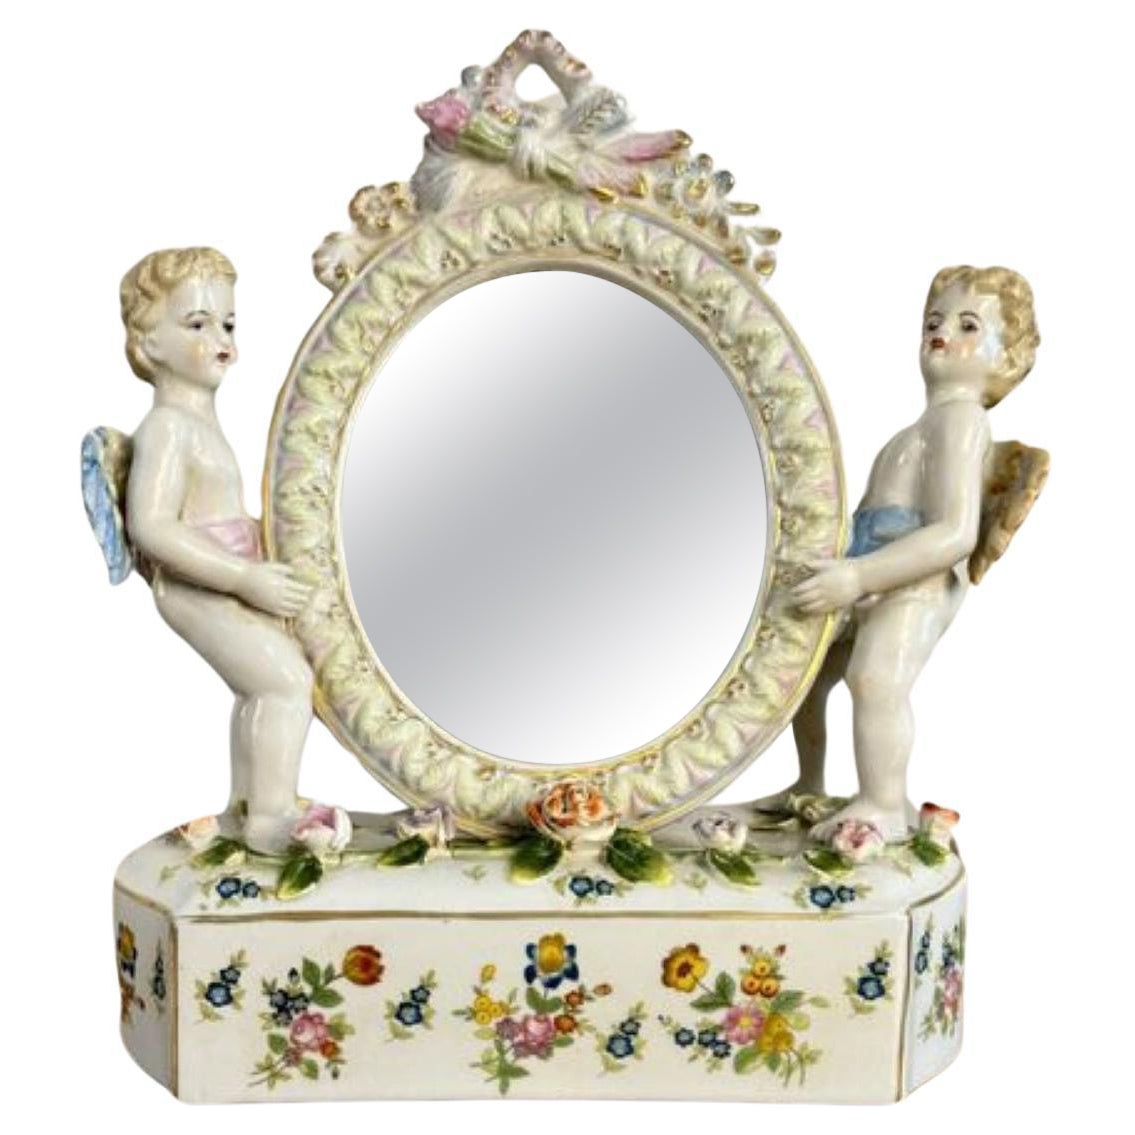 Porcelain Table Mirrors